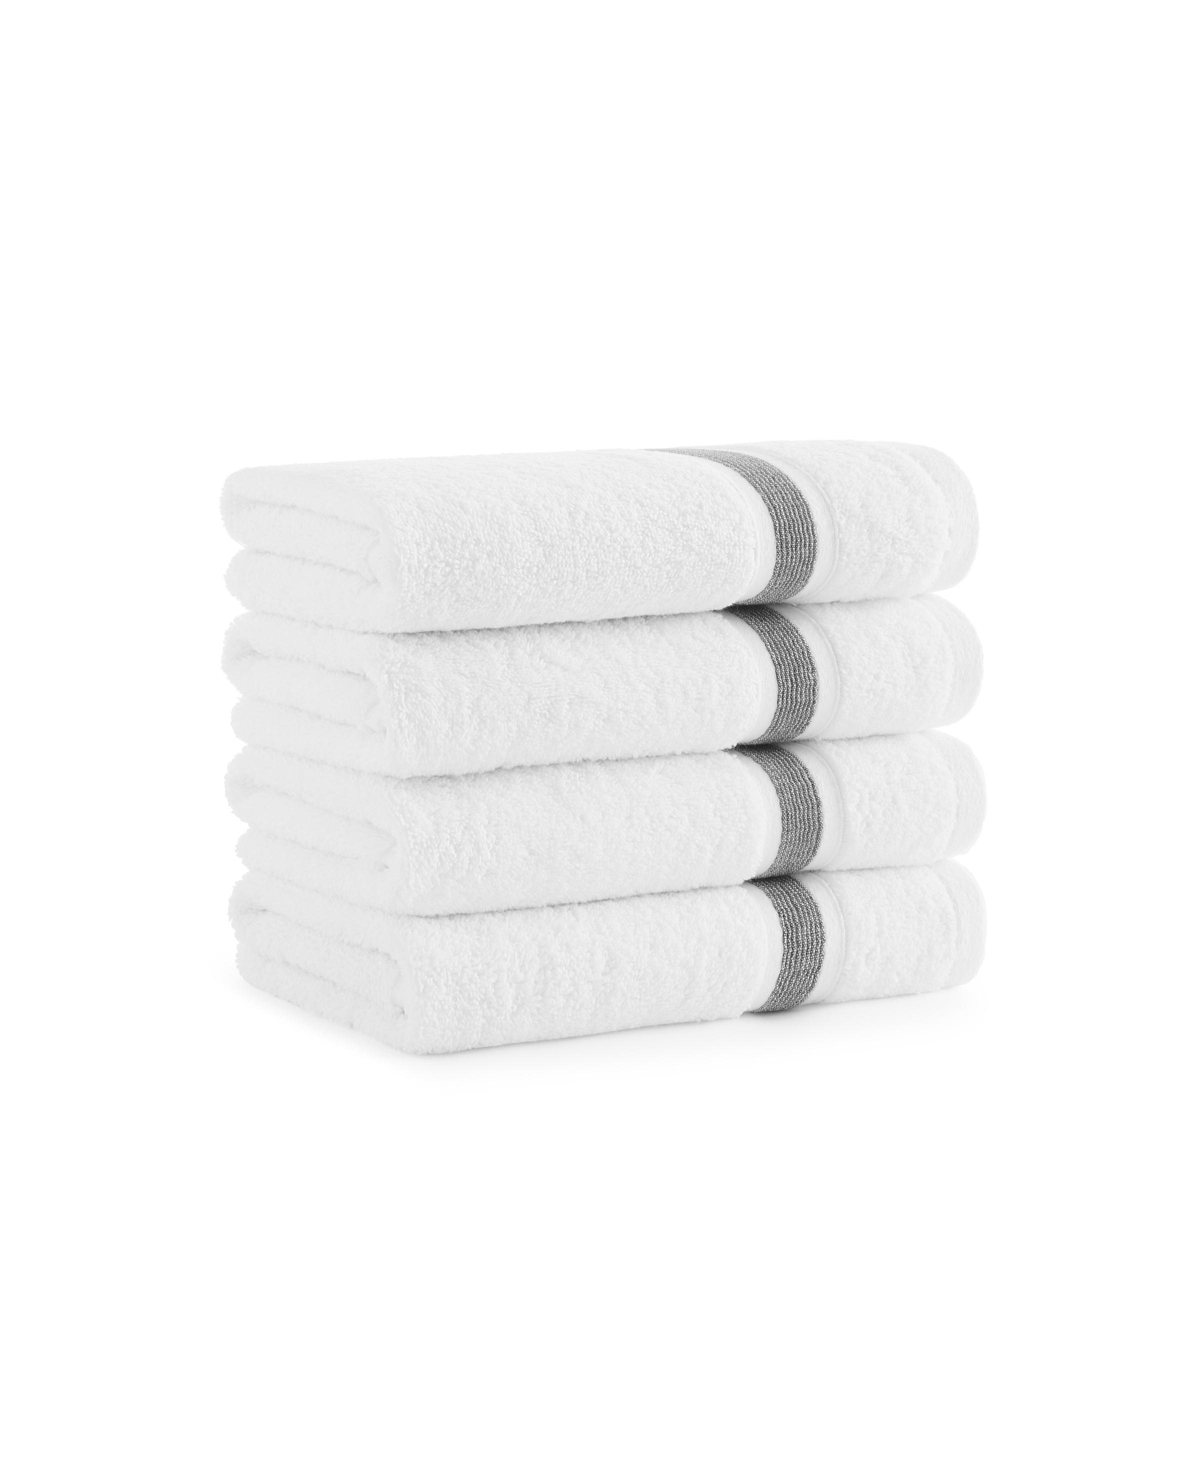 Aston And Arden Aegean Eco-friendly Recycled Turkish Hand Towels (4 Pack), 18x30, 600 Gsm, White With Weft Woven Str In Light Gray